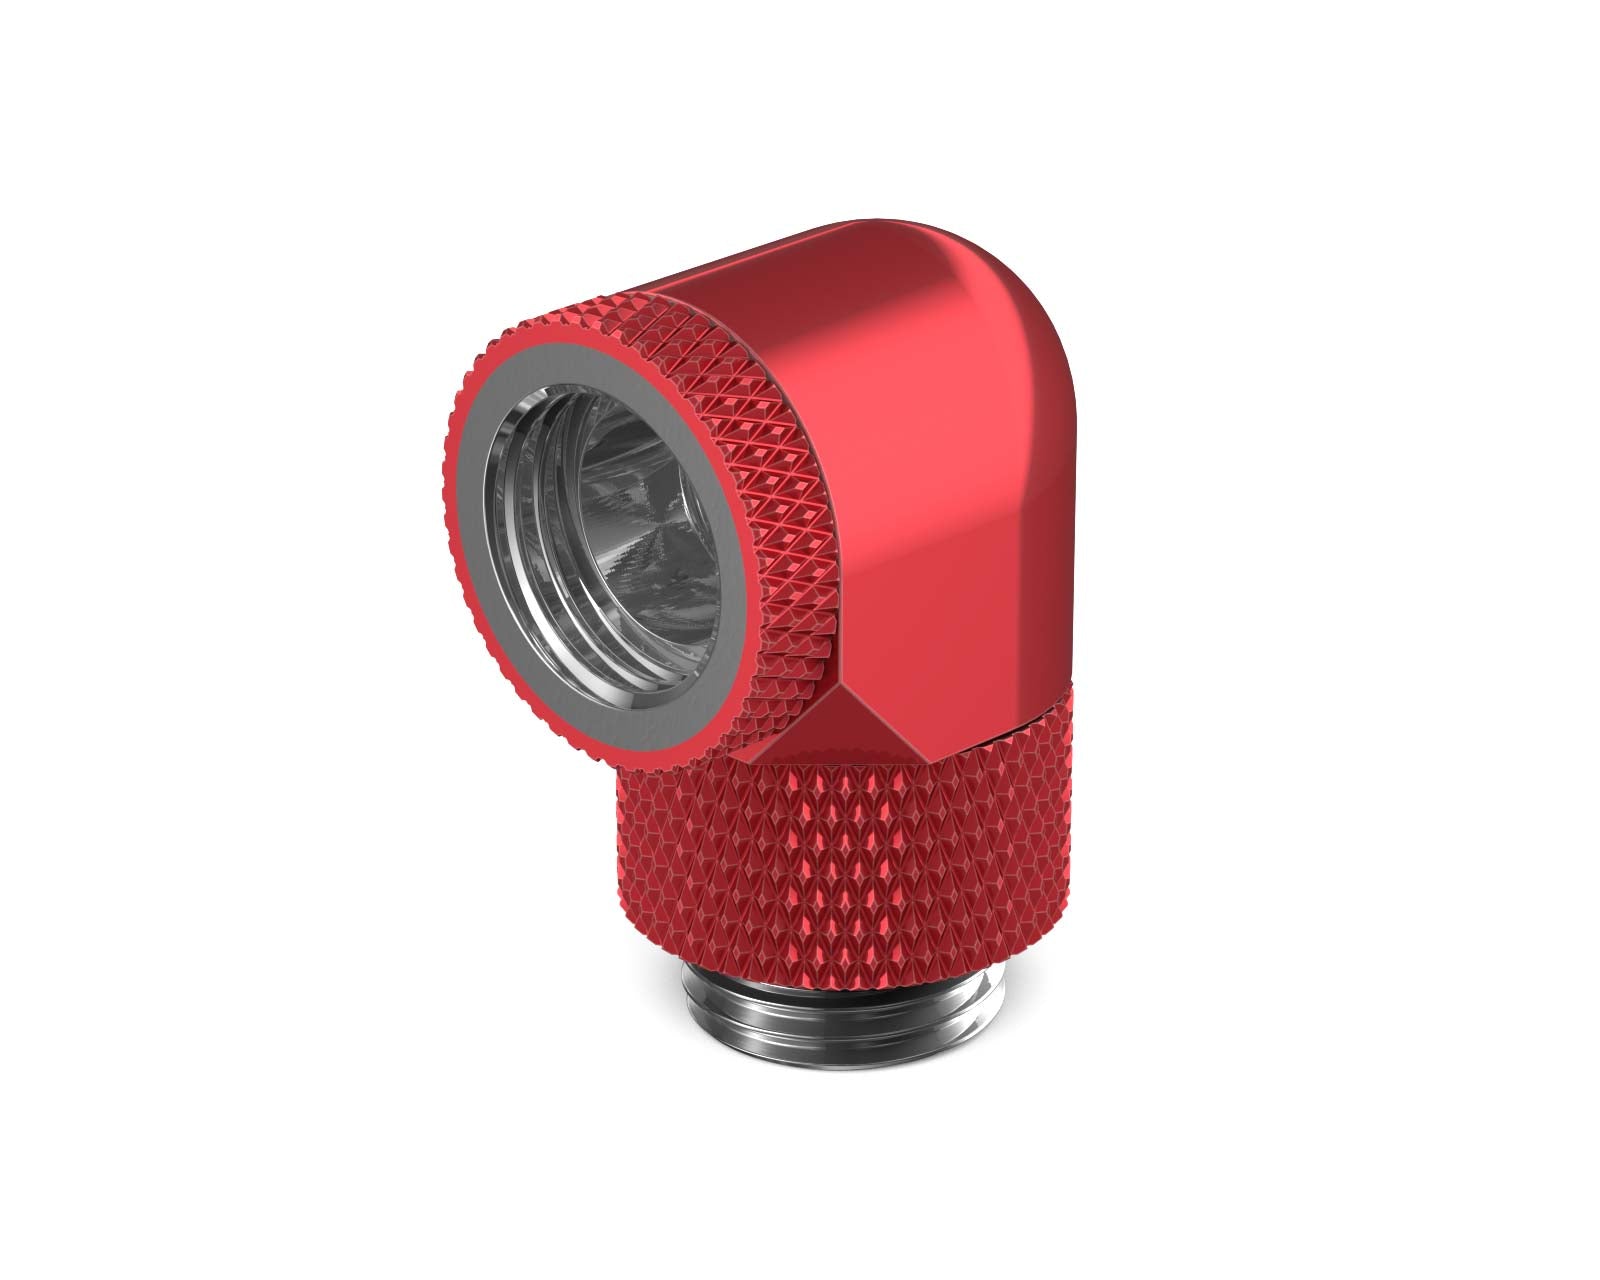 PrimoChill Male to Female G 1/4in. 90 Degree SX Dual Rotary Elbow Fitting - PrimoChill - KEEPING IT COOL Candy Red